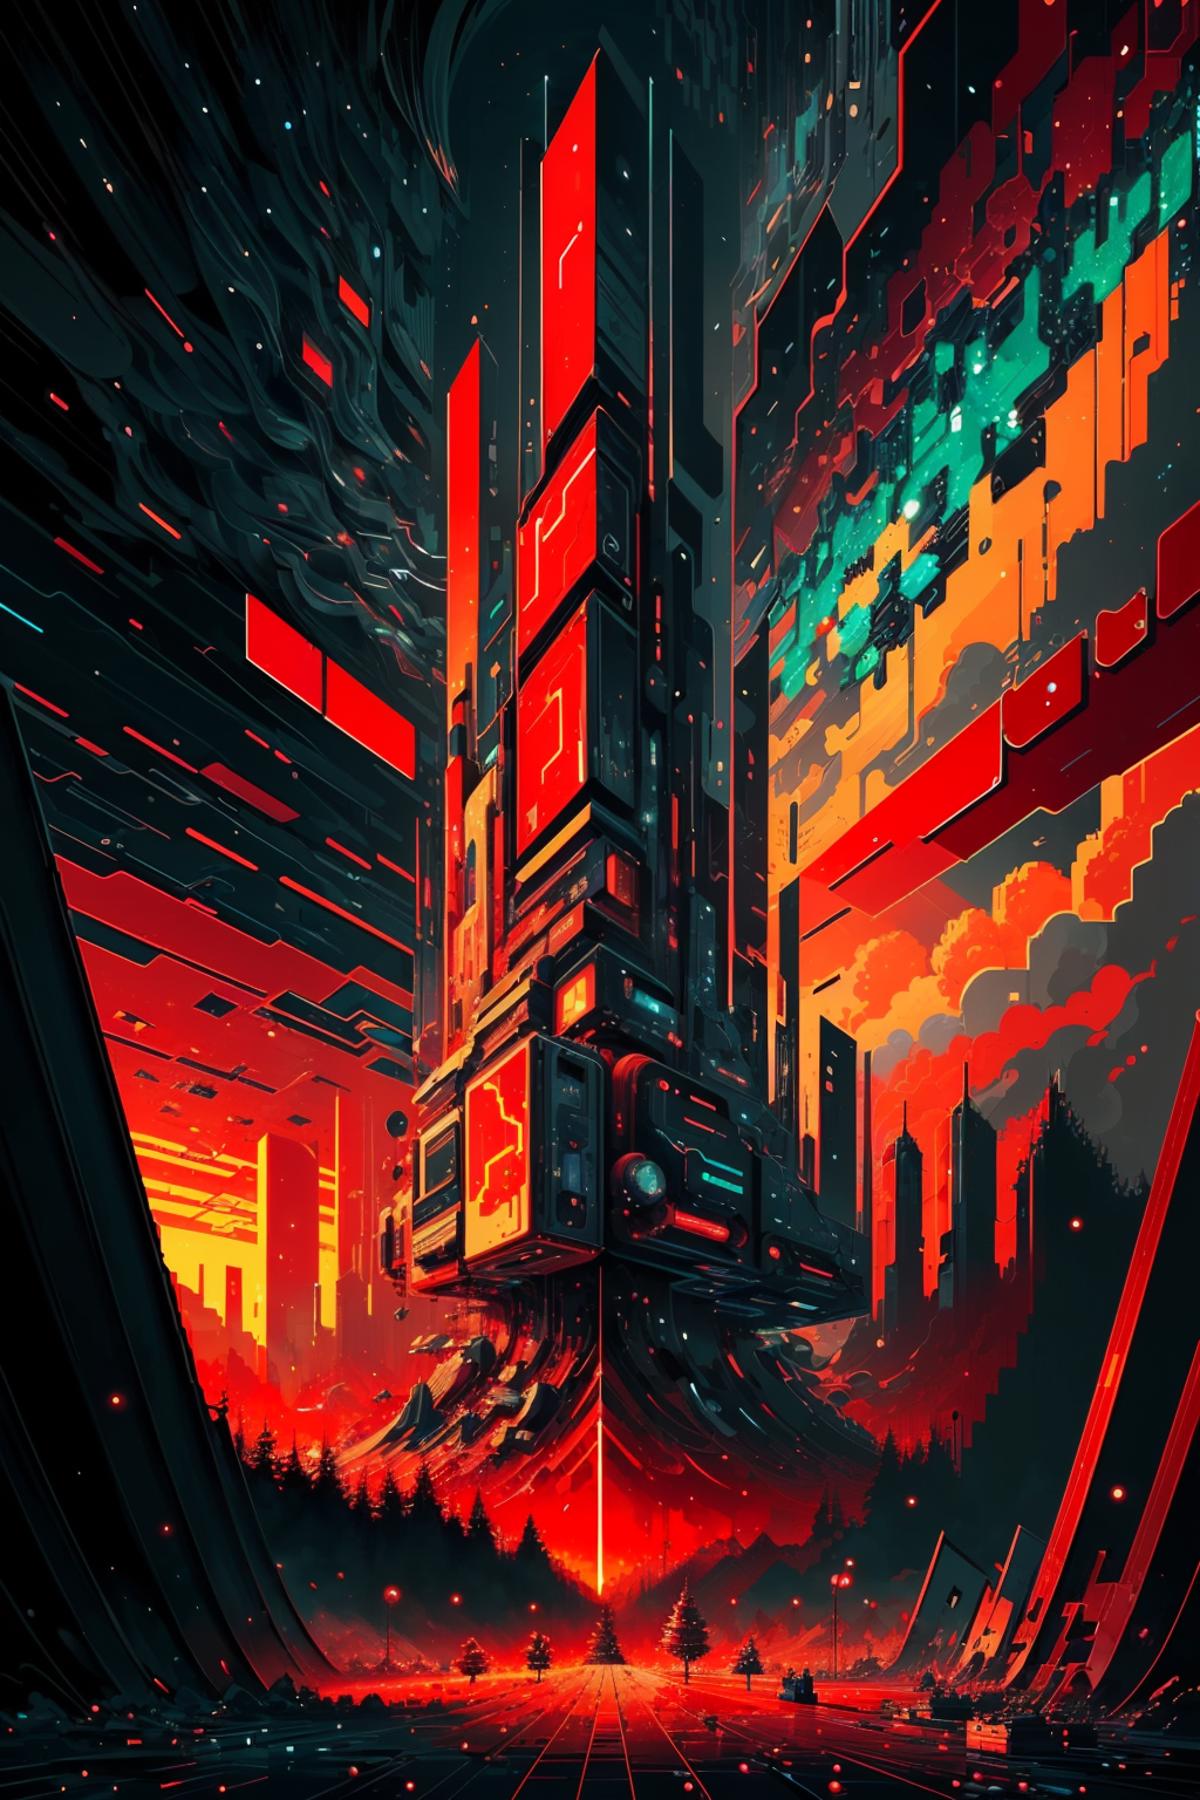 A futuristic cityscape with a skyscraper and a red sunset in the background.